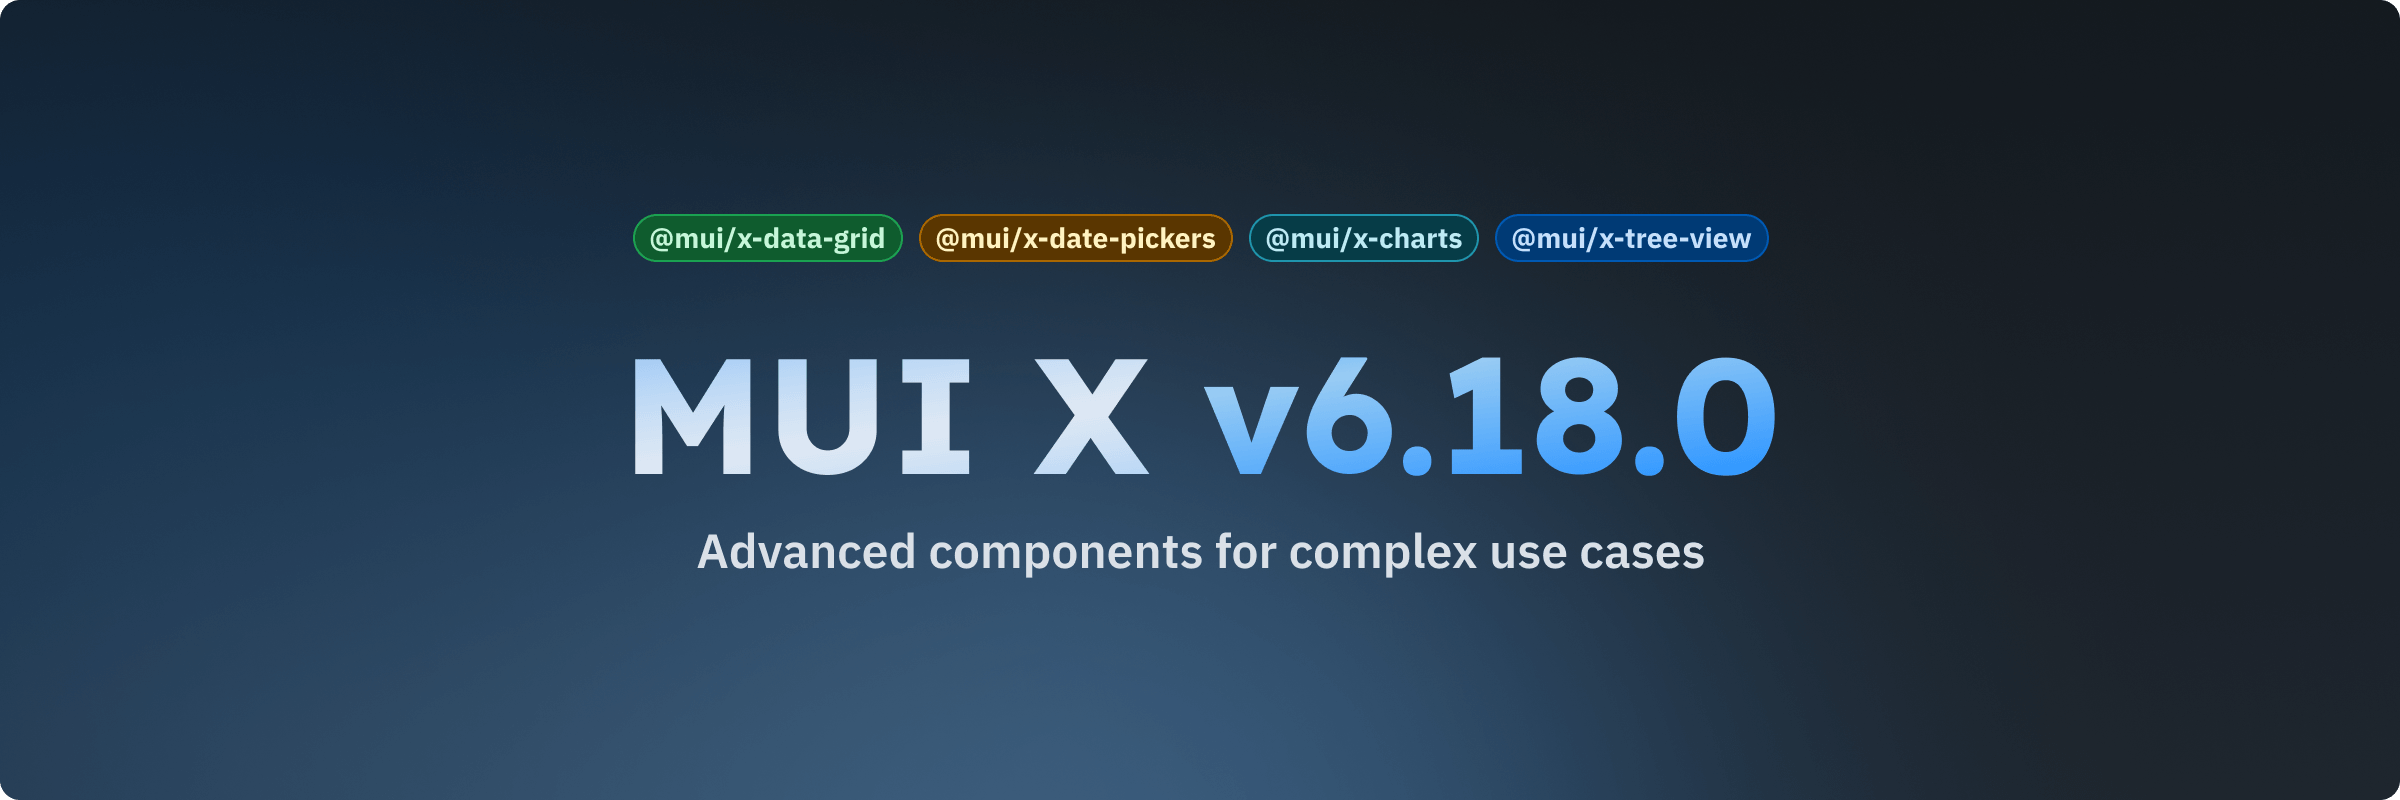 open v6.18.0 release page